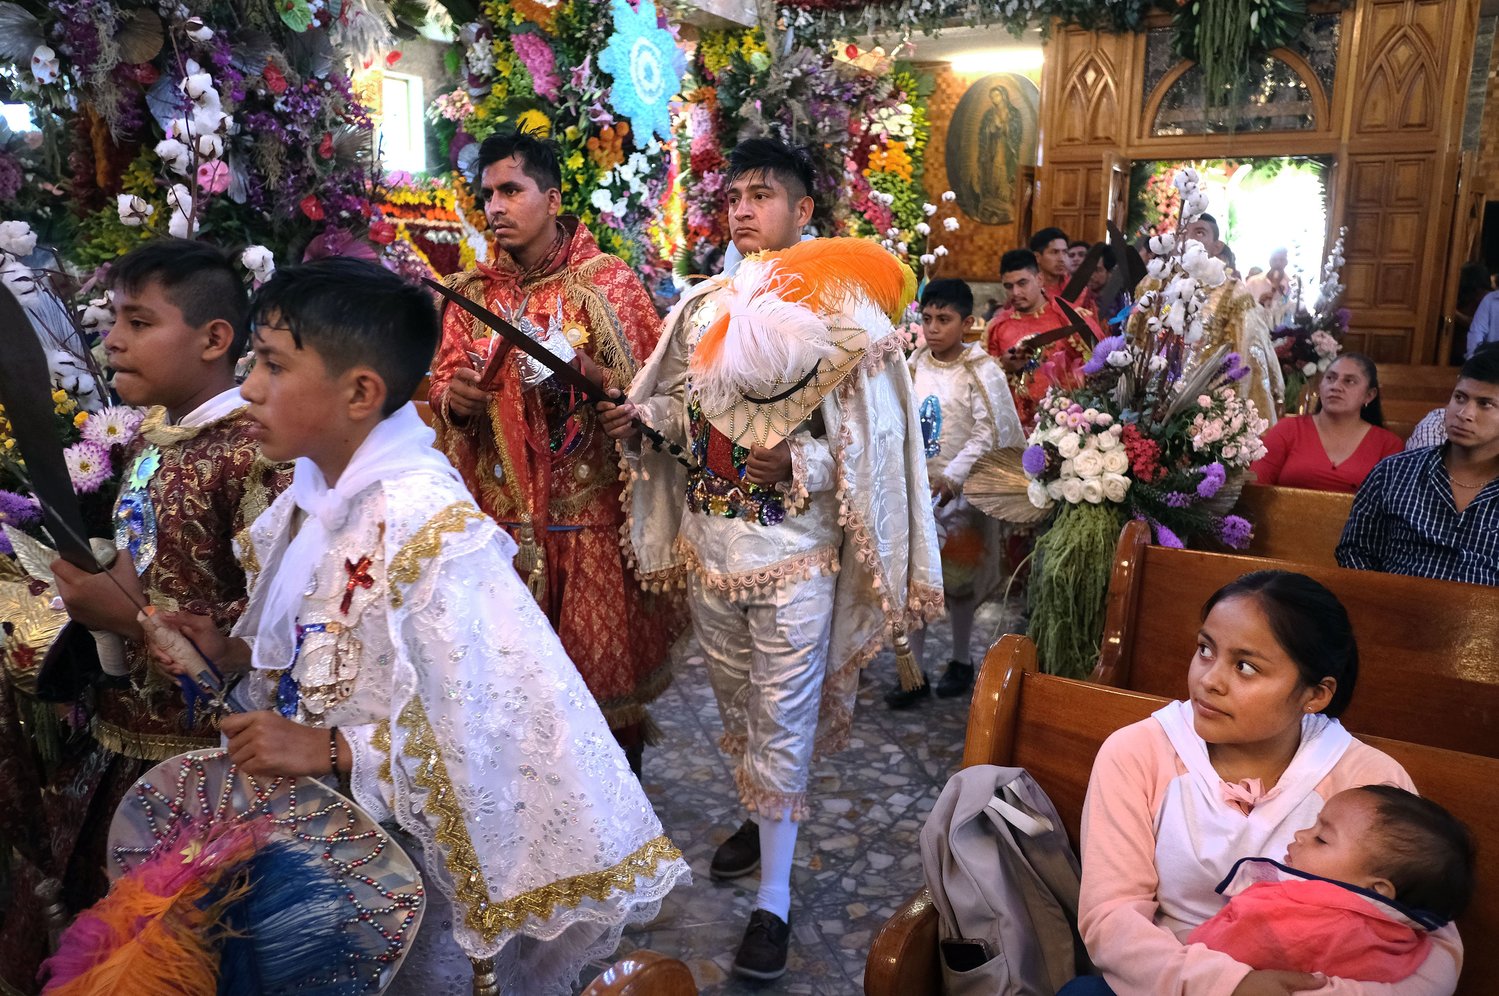 A woman watches as members of a traditional dance group enter Santa Ana Ixtlahuatzingo Catholic Church in Tenancingo, Mexico, July 26, during a celebration on the feast of the church’s patron saint, St. Anne, grandmother of Jesus.